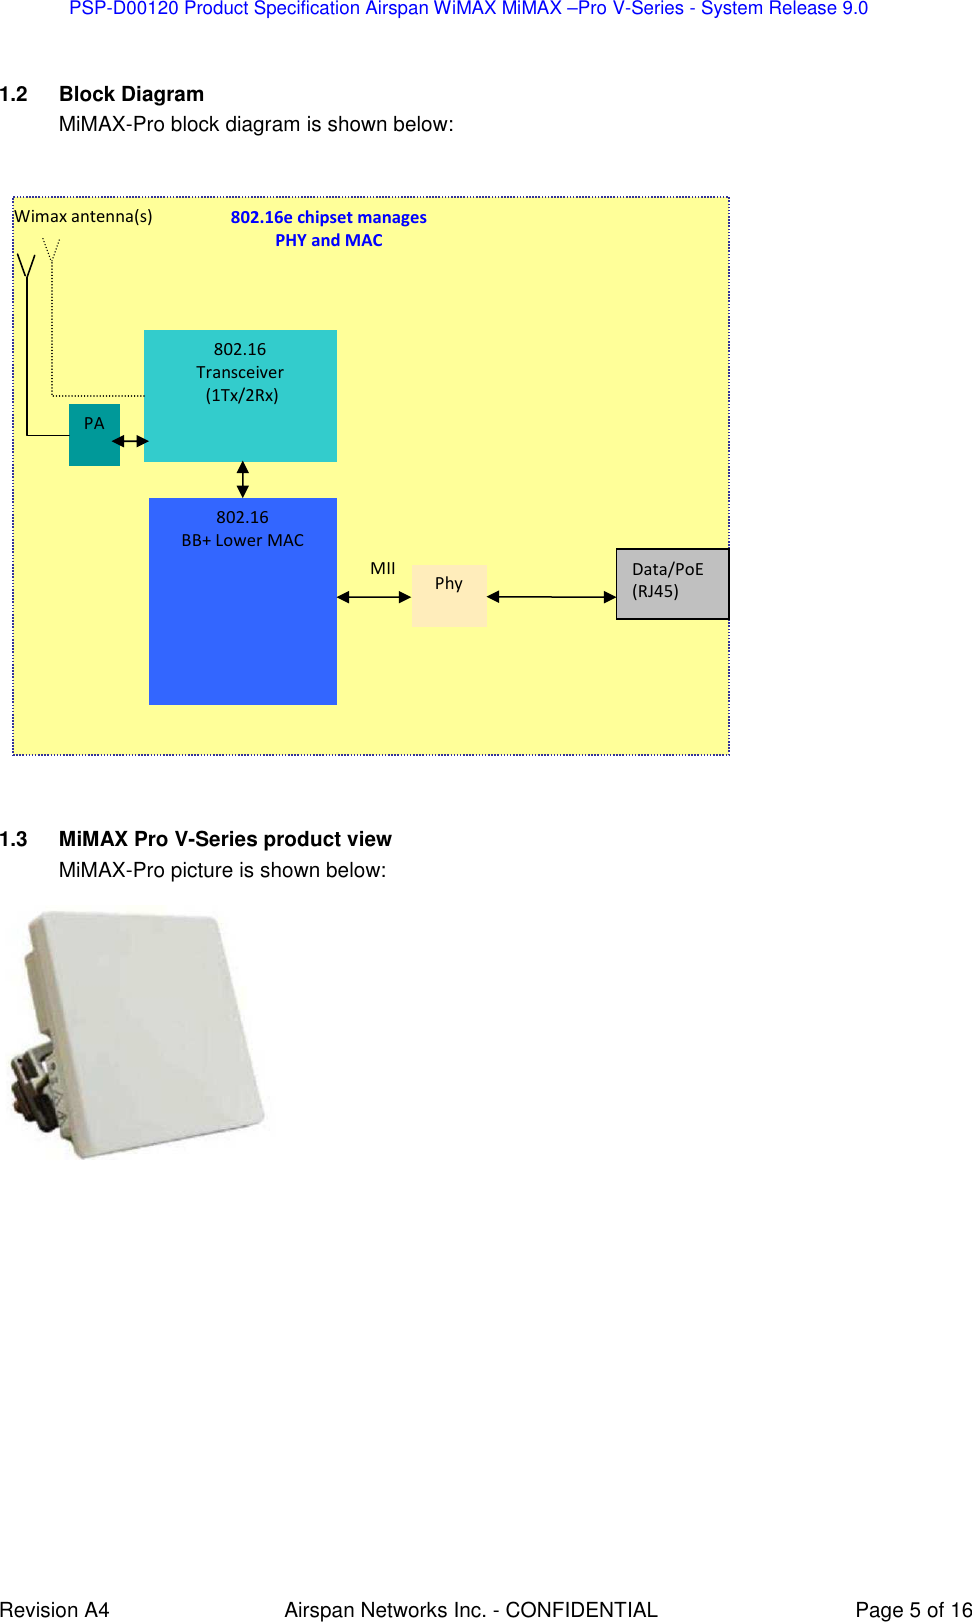 PSP-D00120 Product Specification Airspan WiMAX MiMAX –Pro V-Series - System Release 9.0    Revision A4  Airspan Networks Inc. - CONFIDENTIAL  Page 5 of 16  1.2  Block Diagram MiMAX-Pro block diagram is shown below:    1.3  MiMAX Pro V-Series product view MiMAX-Pro picture is shown below:   802.16 Transceiver  (1Tx/2Rx) 802.16 BB+ Lower MAC  PA Wimax antenna(s) MII Phy Data/PoE (RJ45) 802.16e chipset manages  PHY and MAC 